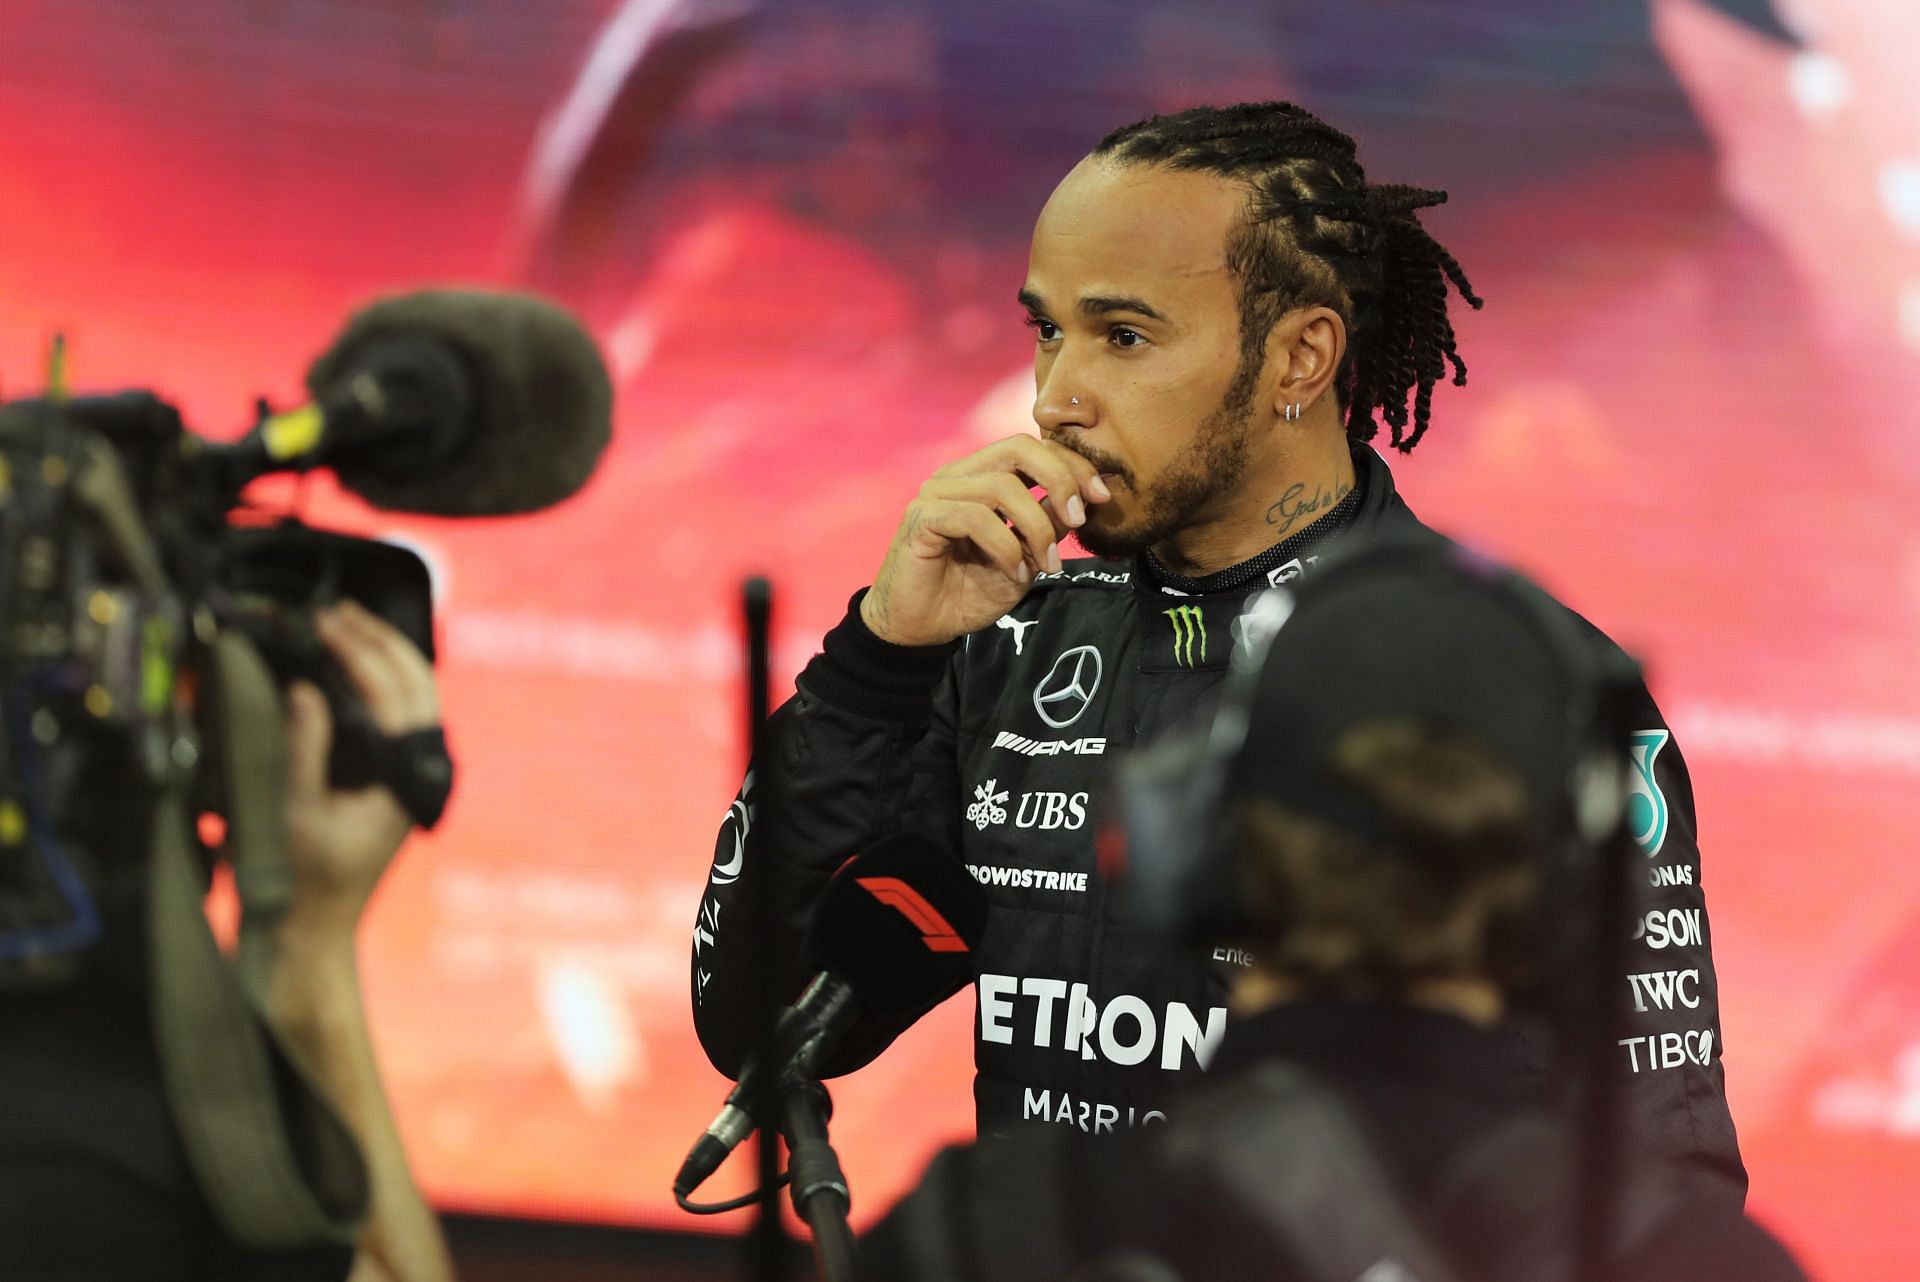 Lewis Hamilton speaks to the media after the 2021 Abu Dhabi Grand Prix (Photo by Kamran Jebreili - Pool/Getty Images)